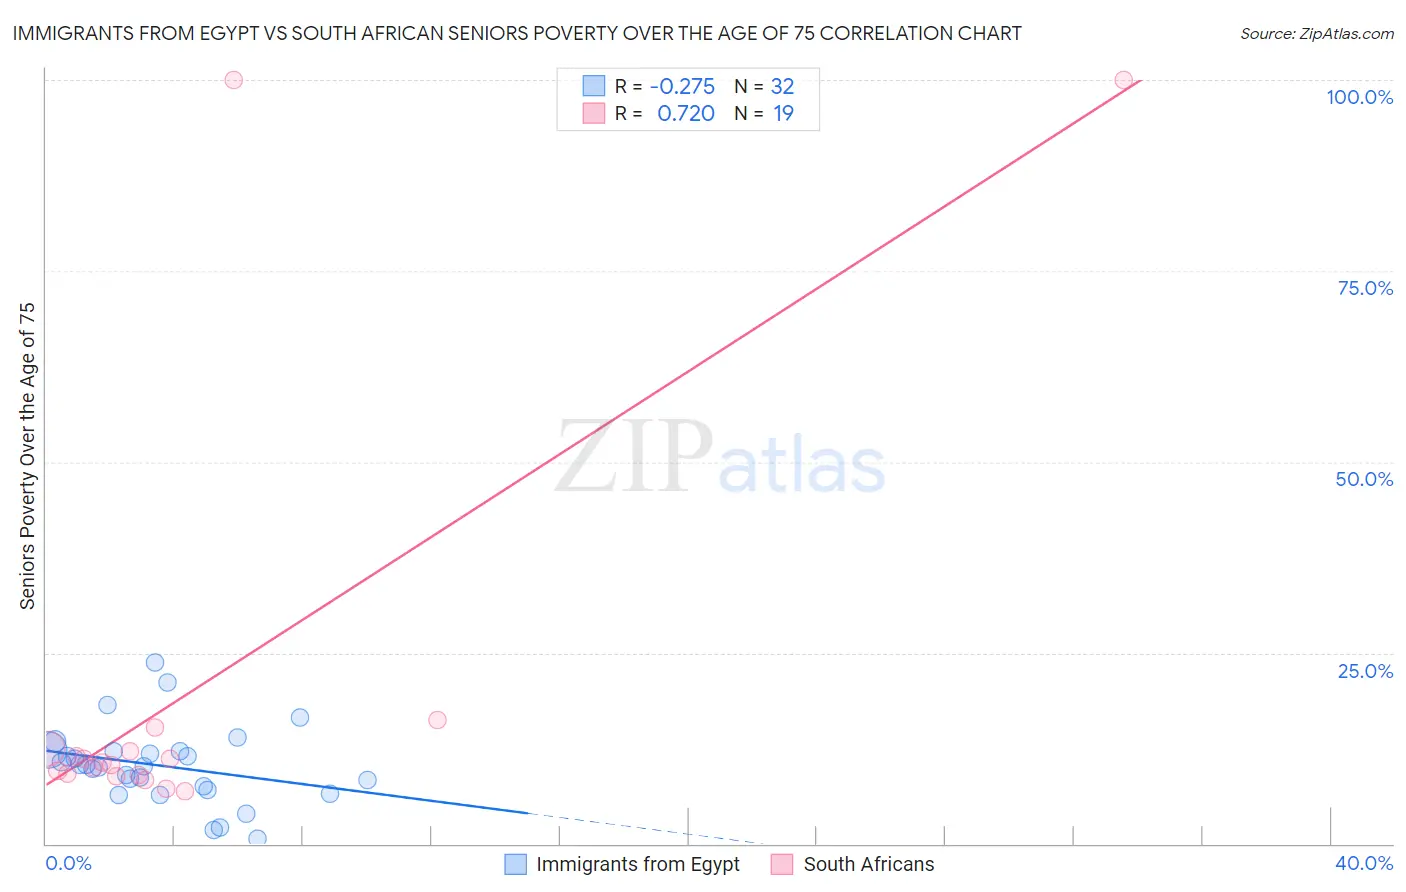 Immigrants from Egypt vs South African Seniors Poverty Over the Age of 75